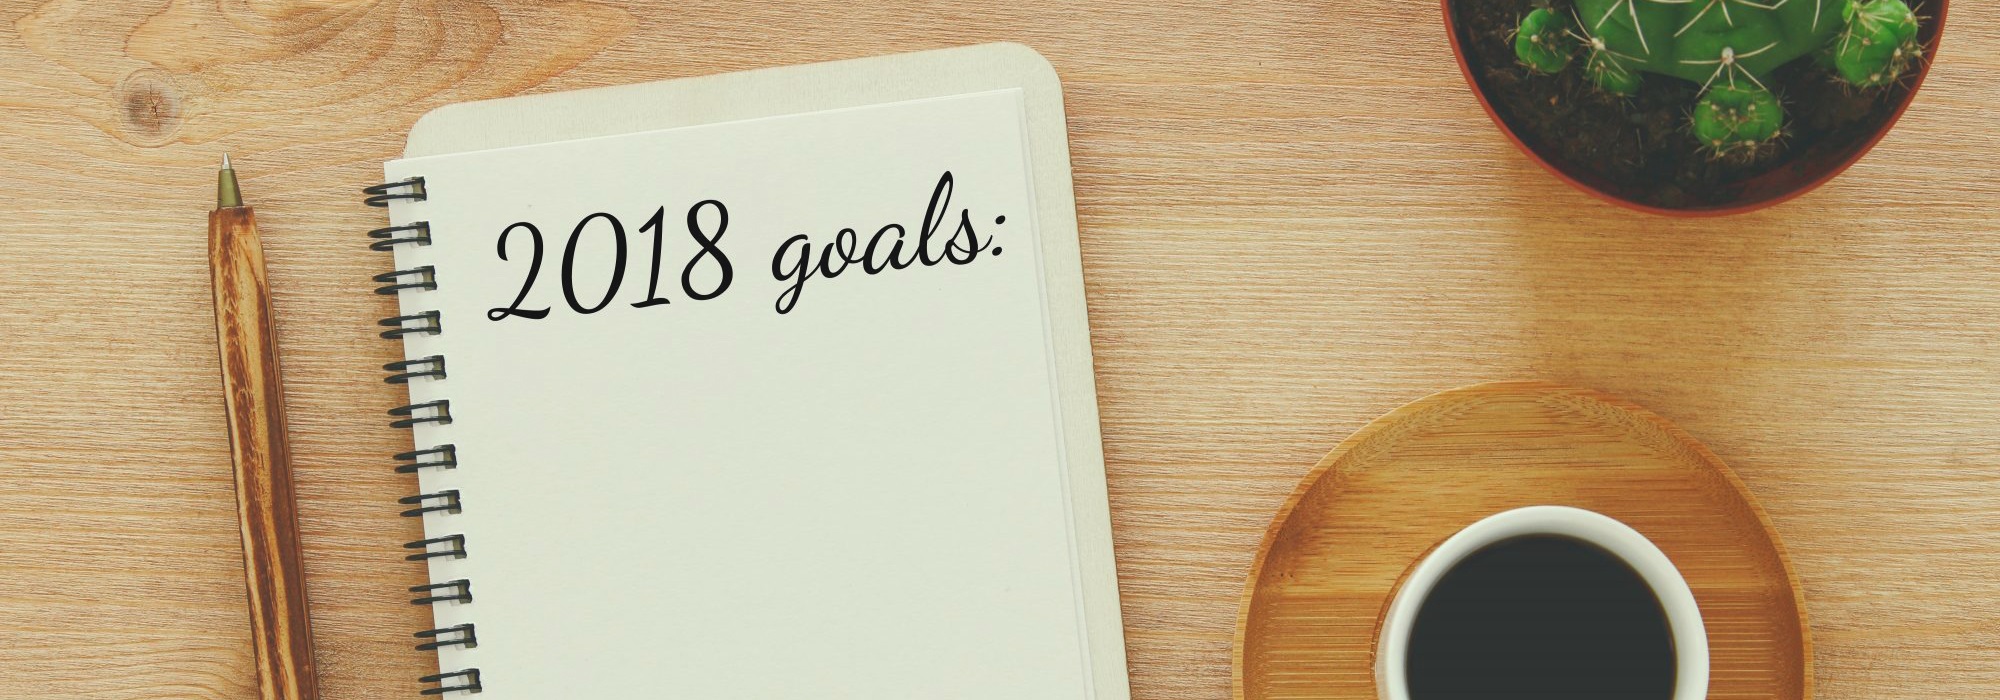 3 NEW YEAR’S RESOLUTIONS FOR MARKETING YOUNGER BRANDS